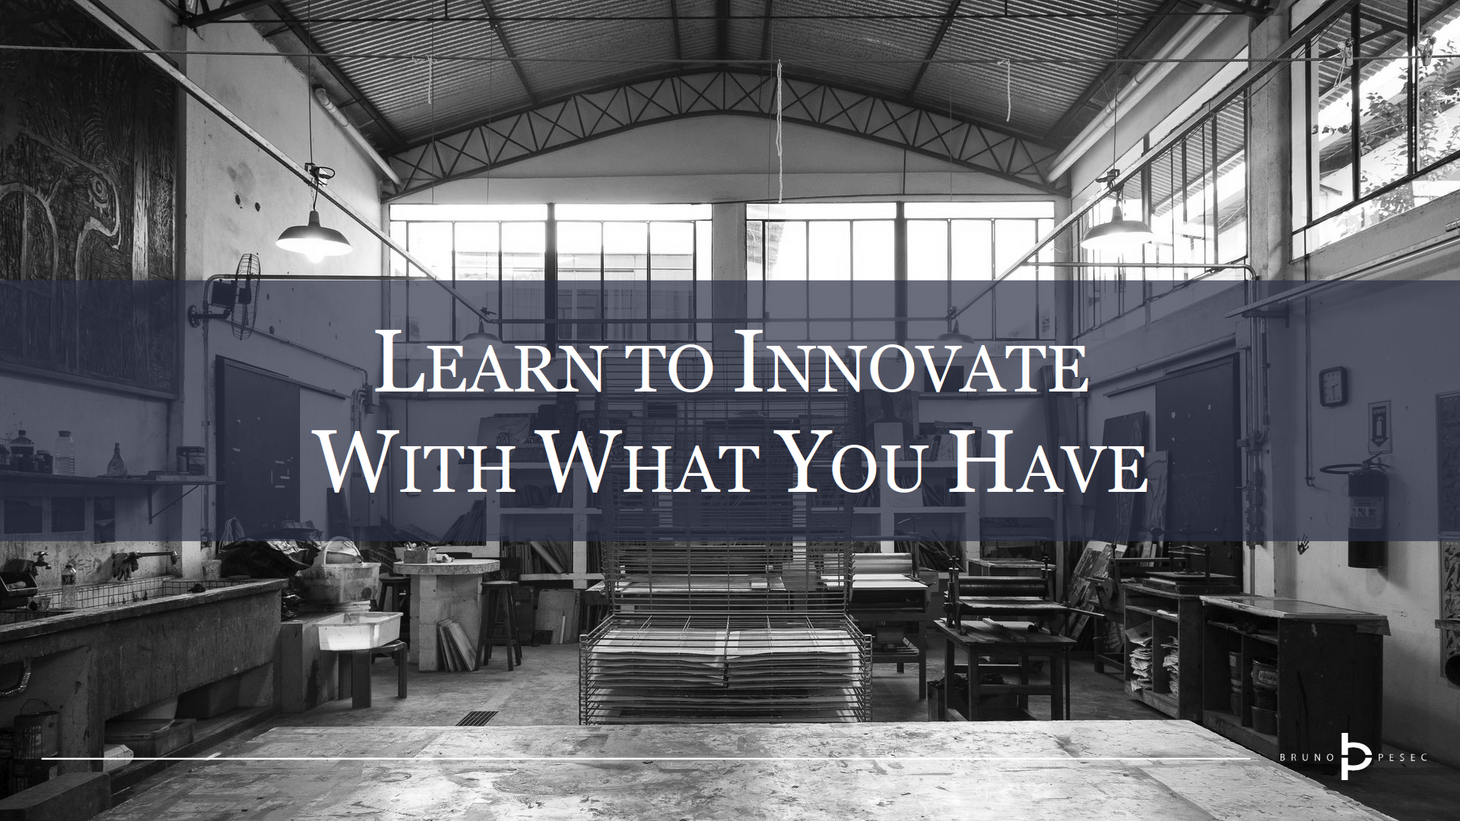 Learn to innovate with what you have